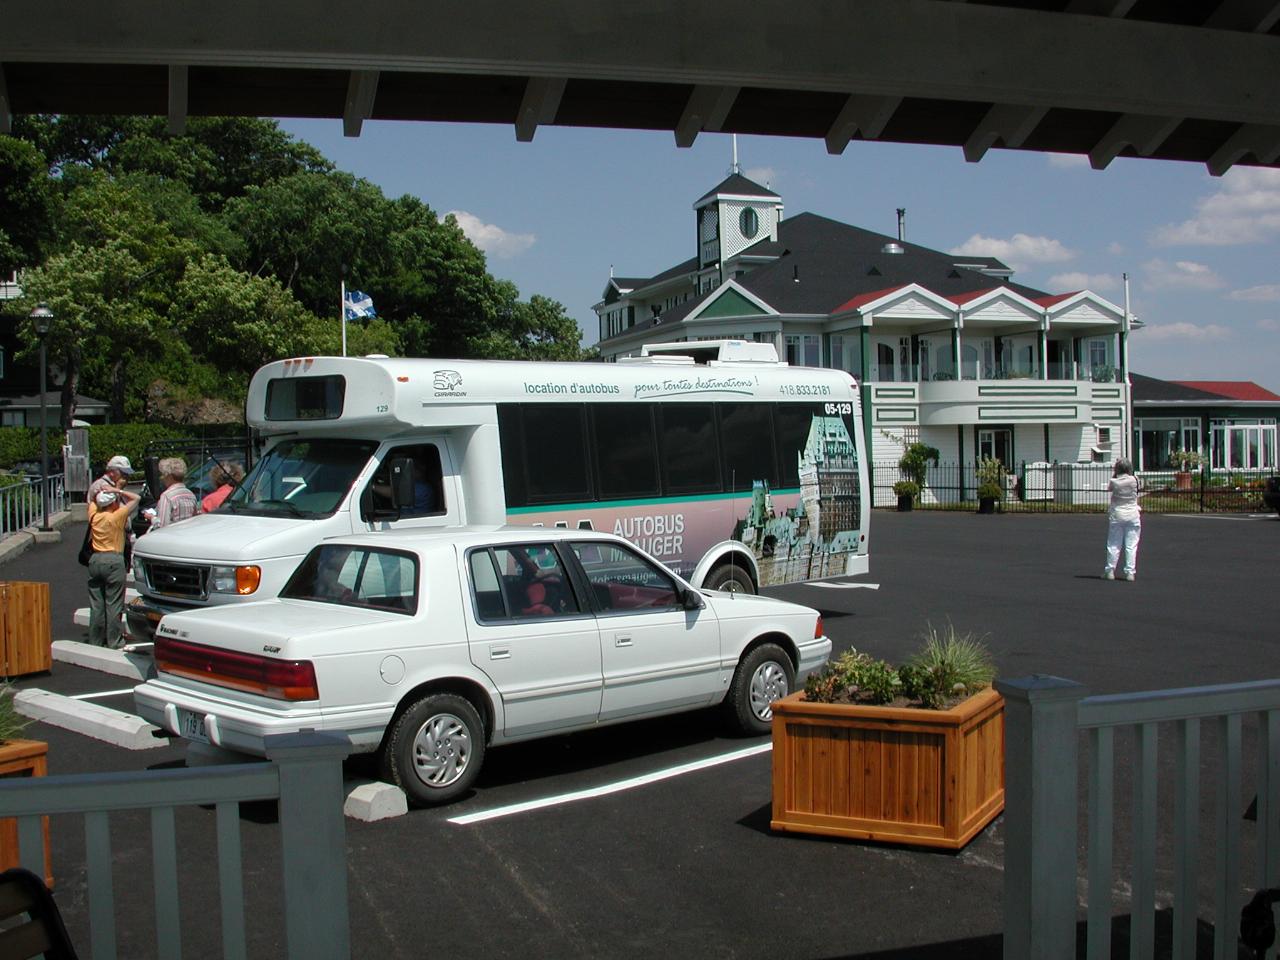 Tour bus and lunch restaurant on Île d'Orleans; preparing to reboard the bus